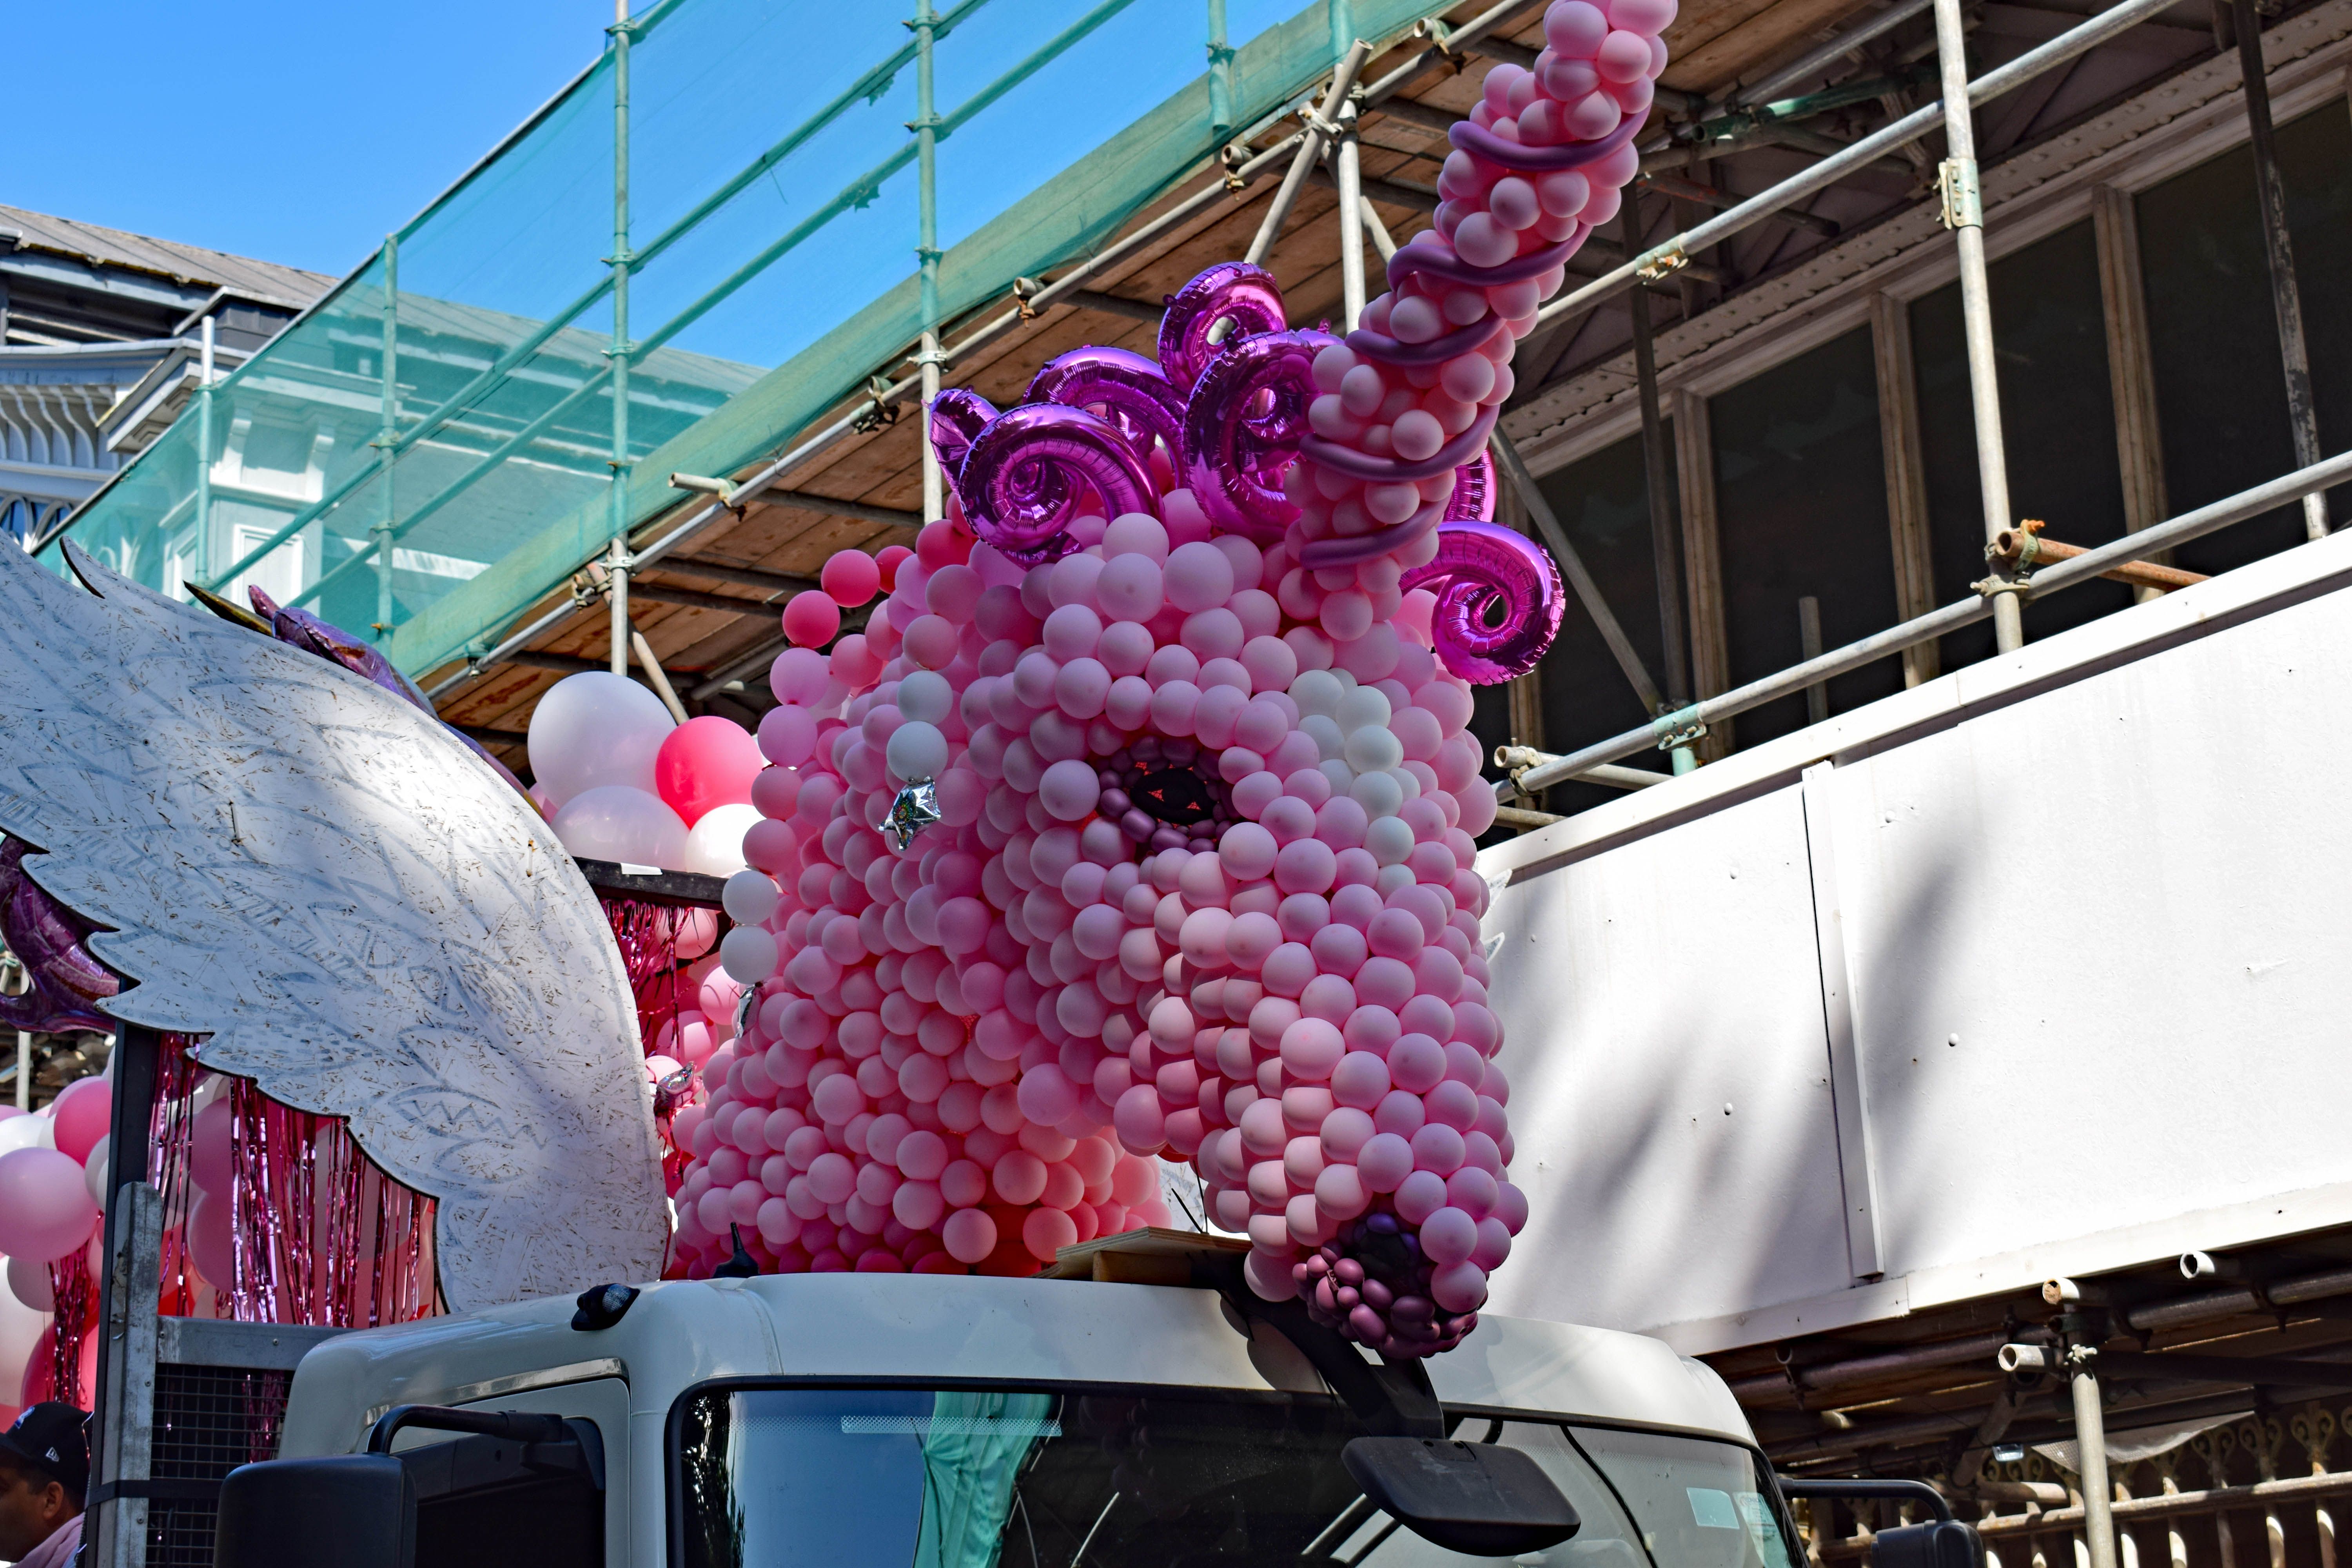 A pink unicorn float waiting to join the parade, The unicorn is made from pink balloons